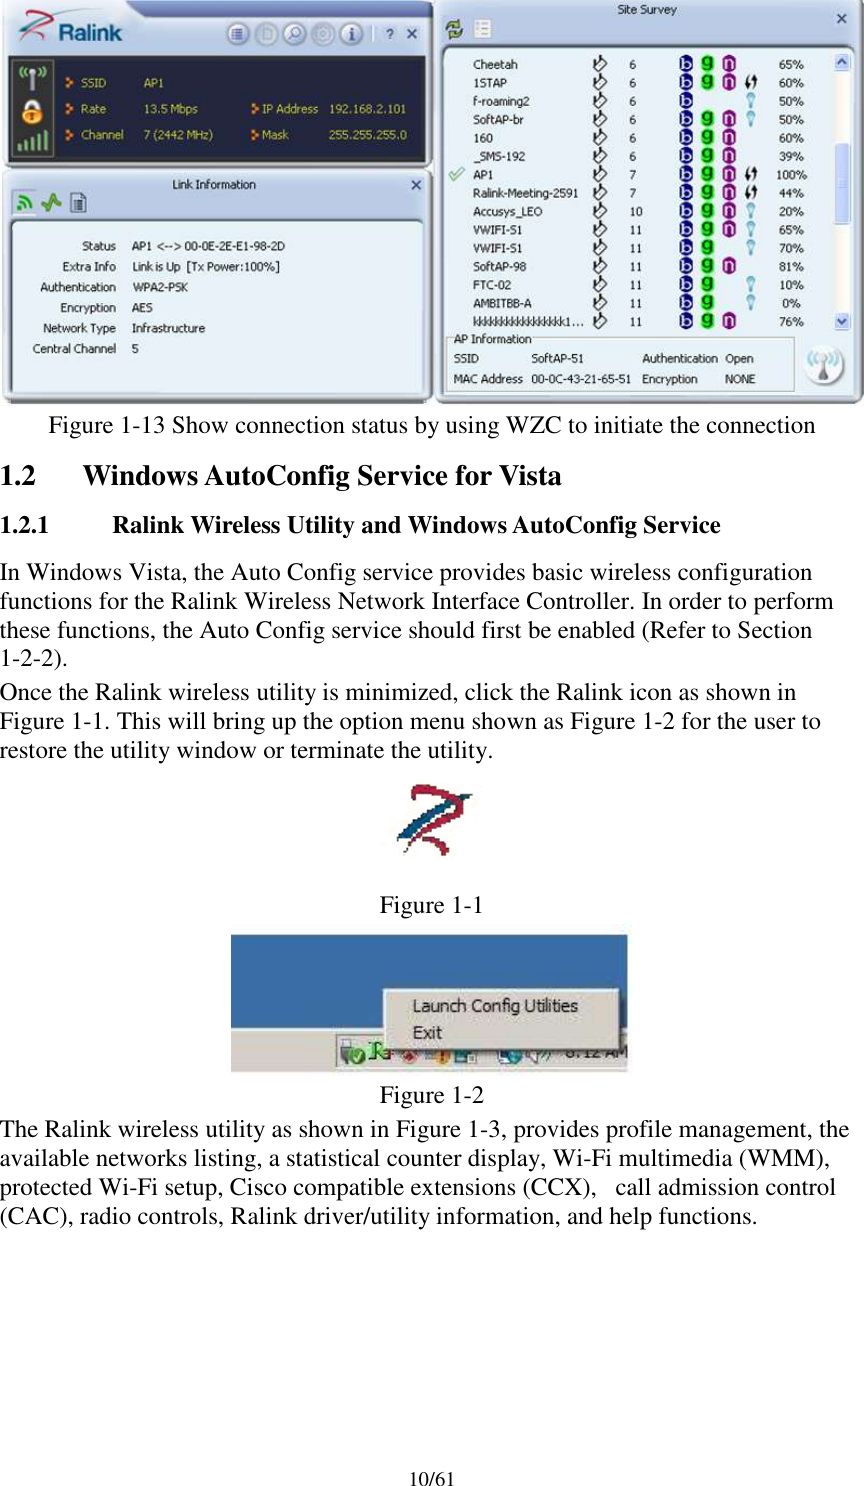 10/61Figure 1-13 Show connection status by using WZC to initiate the connection1.2 Windows AutoConfig Service for Vista1.2.1 Ralink Wireless Utility and Windows AutoConfig ServiceIn Windows Vista, the Auto Config service provides basic wireless configurationfunctions for the Ralink Wireless Network Interface Controller. In order to performthese functions, the Auto Config service should first be enabled (Refer to Section1-2-2).Once the Ralink wireless utility is minimized, click the Ralink icon as shown inFigure 1-1. This will bring up the option menu shown as Figure 1-2 for the user torestore the utility window or terminate the utility.Figure 1-1Figure 1-2The Ralink wireless utility as shown in Figure 1-3, provides profile management, theavailable networks listing, a statistical counter display, Wi-Fi multimedia (WMM),protected Wi-Fi setup, Cisco compatible extensions (CCX), call admission control(CAC), radio controls, Ralink driver/utility information, and help functions.